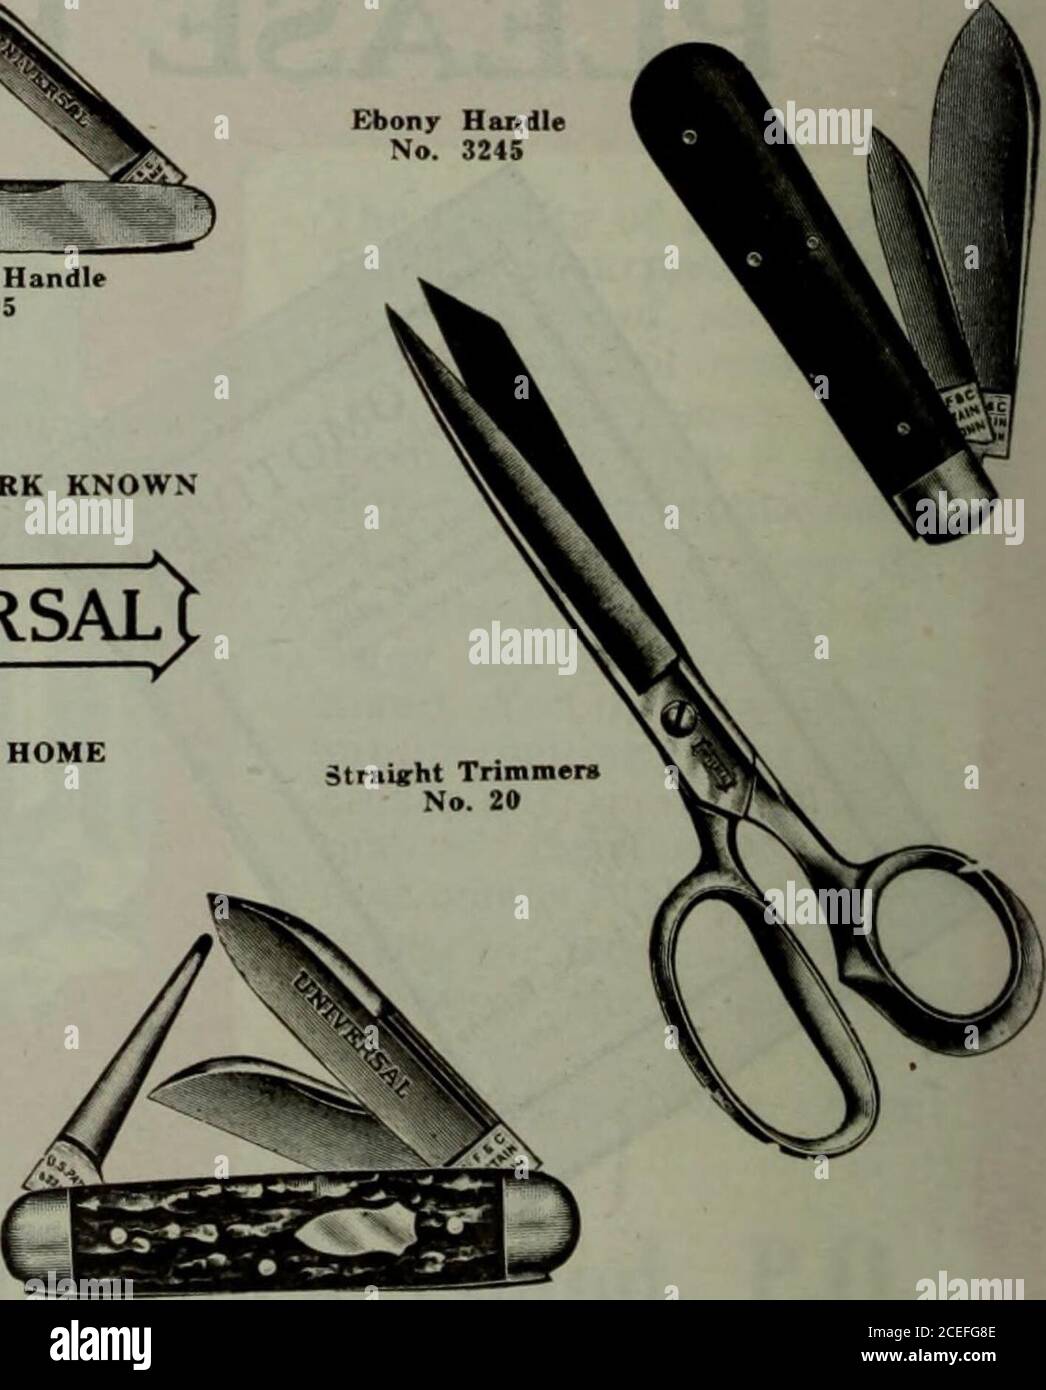 . Hardware merchandising March-June 1919. Nickel Silver HandleNo. 12425 THE TRADE MARK KNOWN UNIVERSAL IN EVERY HOME. Stag: HandleNo. 03214 Stap HandleNo. 00216 April 26, 1919 HARDWARE AND METAL—Advertising Section TKiSisCoii^toBcaBi^Week 1919 MAY 1919 Sun. Mon. Tues. Wed. Thur. Fri. Sat. J • ©H C 22 029 1 2 3 4 5 6 7 8 9 io 11 12 13 14 15 16 17 ^8 19 20 21 22 £2- ^4 *^N ^6 27 28 29 30 w^S* May 26 to 31 will be Ingersoll Week Weve planned a real advertising drive for that week. Specialwindow displays will direct people to your store—and specialdisplays that hitch up to these advertisements hav Stock Photo